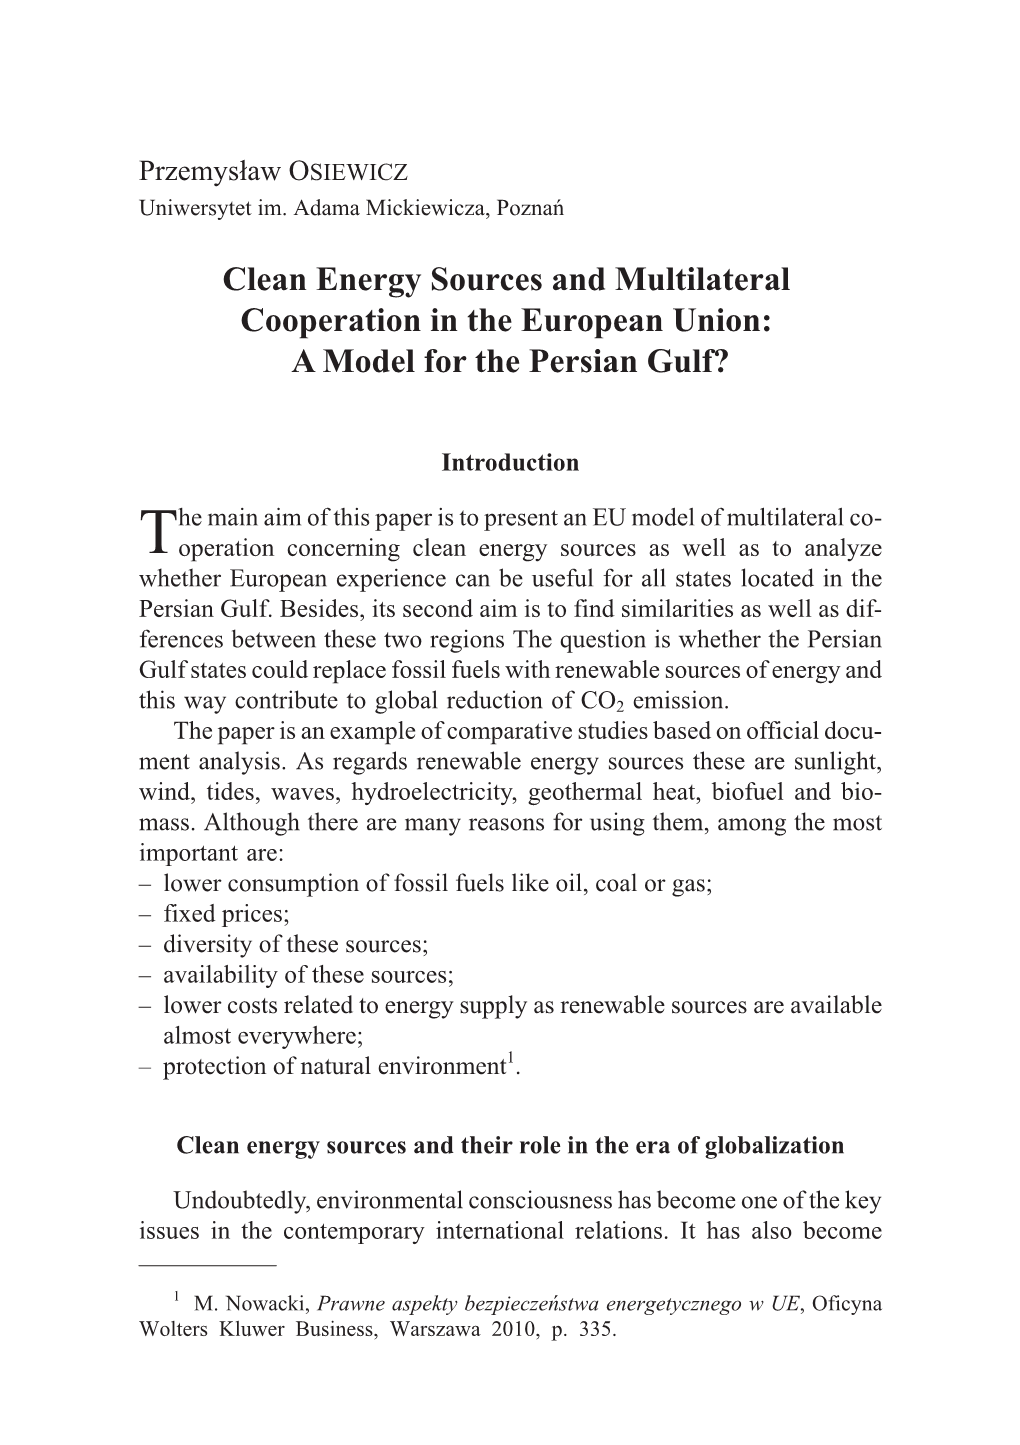 Clean Energy Sources and Multilateral Cooperation in the European Union: a Model for the Persian Gulf?